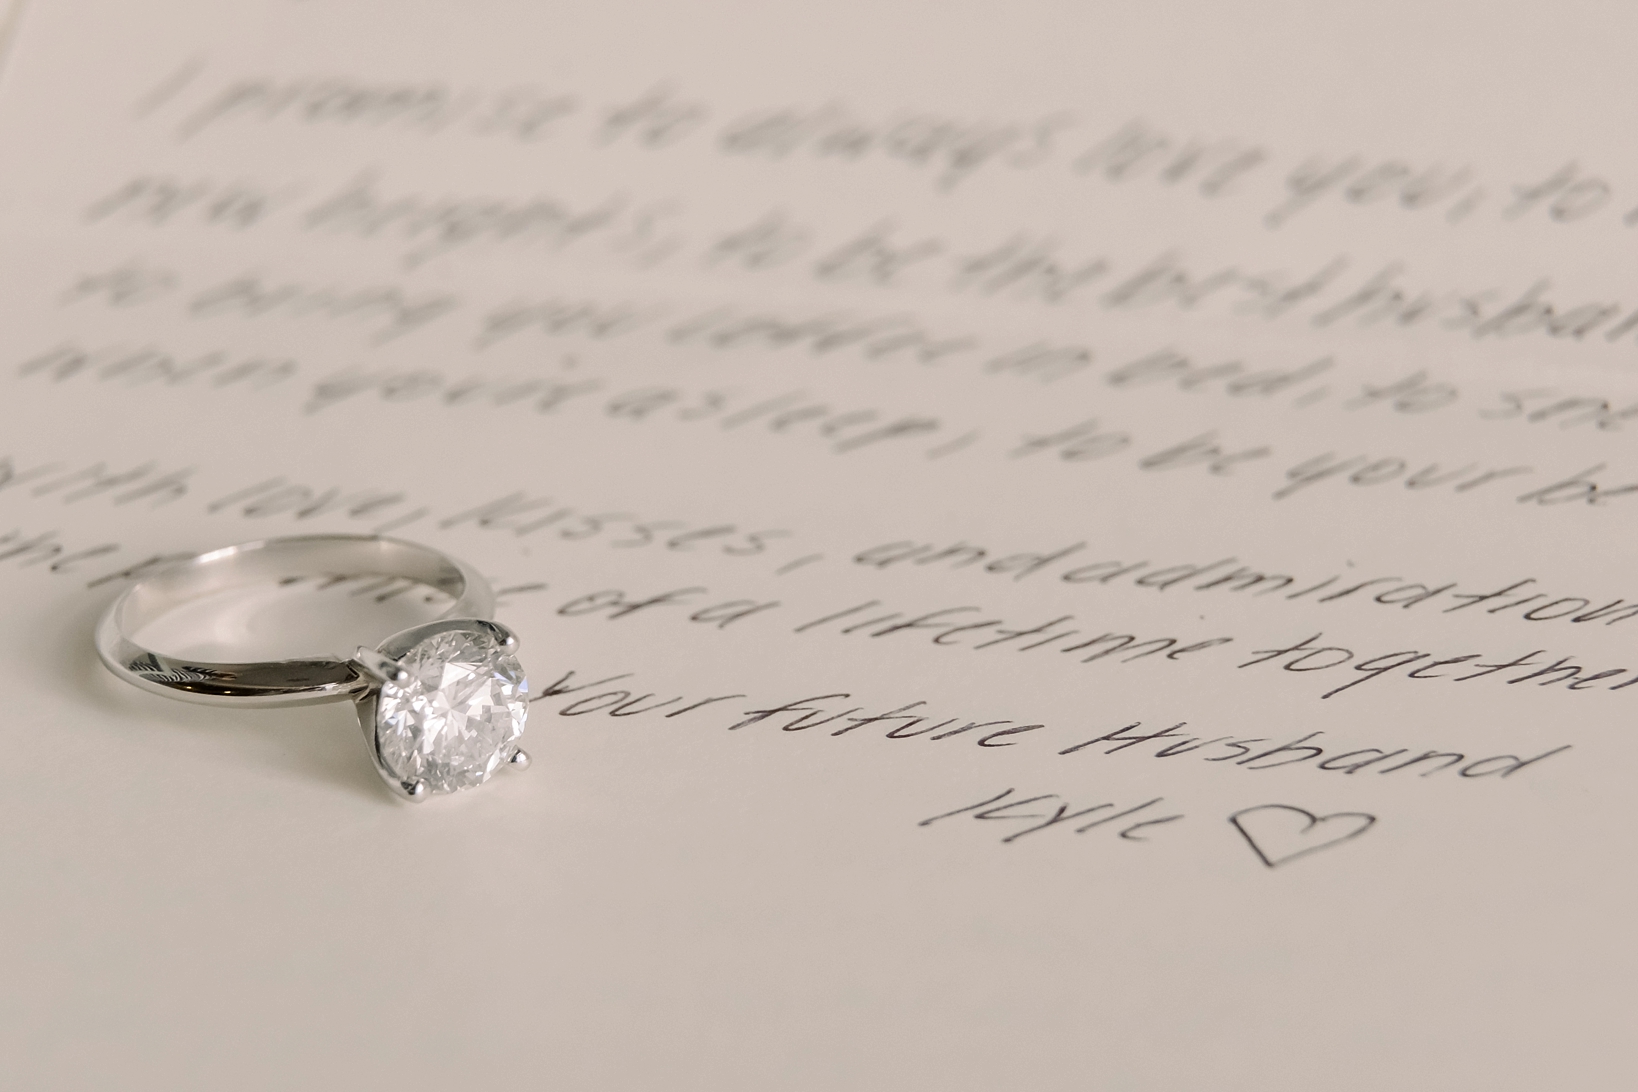 The bride's engagement ring on her fiance's letter to her on their wedding day